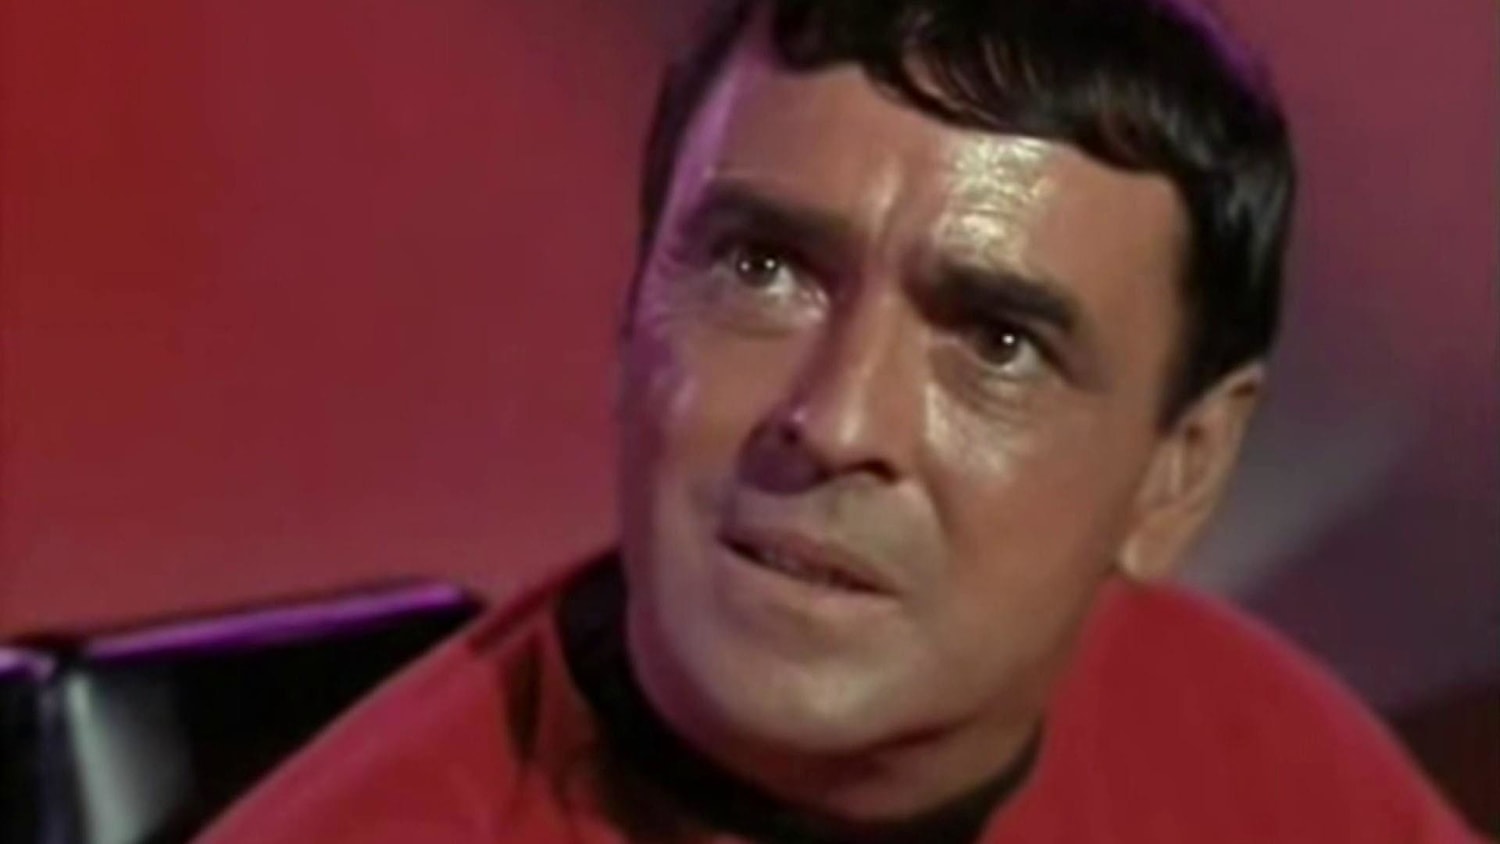 Star Trek' actor James Doohan's ashes are on International Space